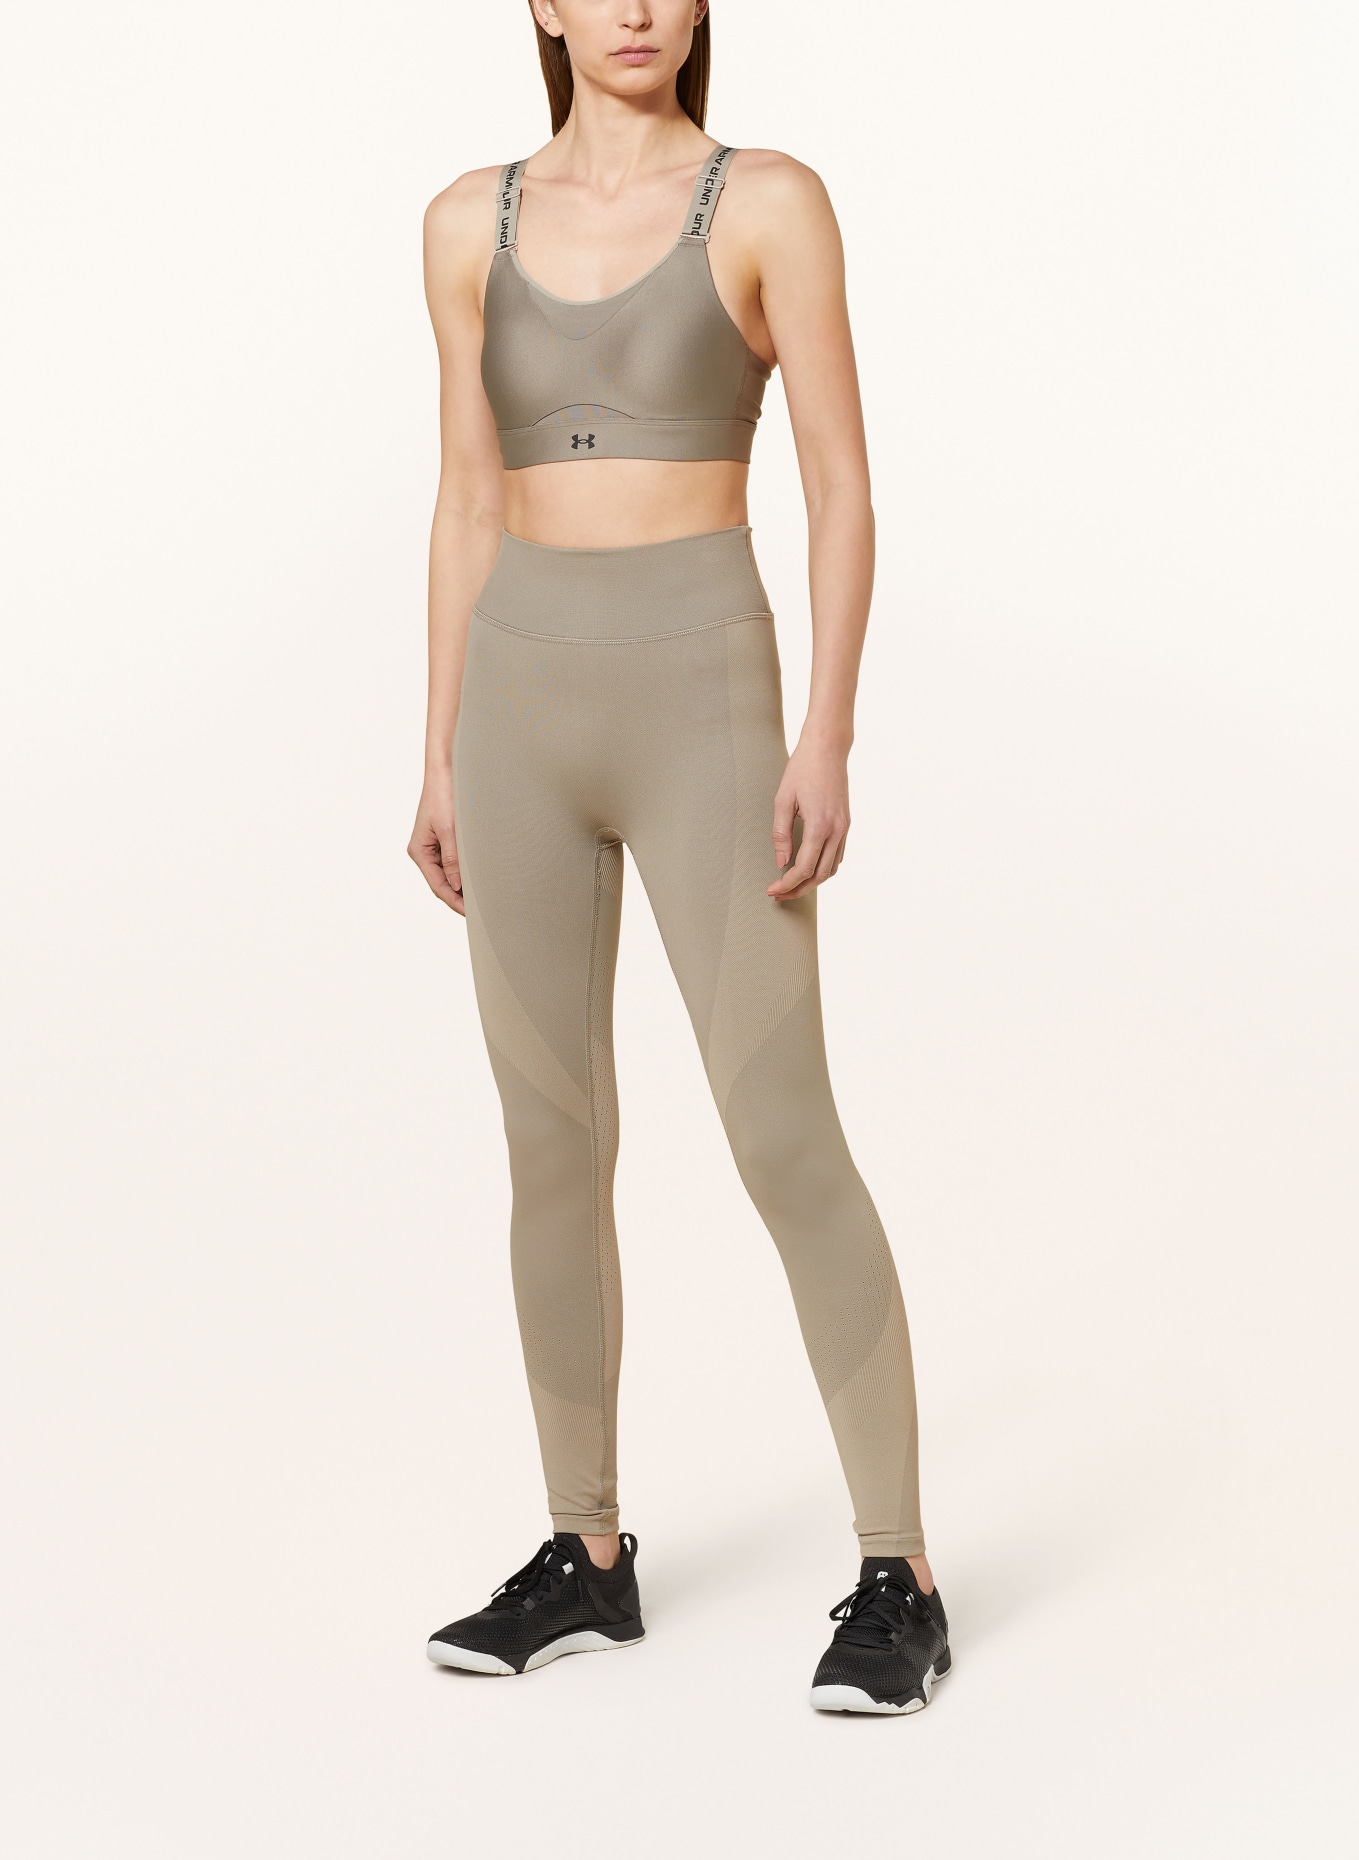 UNDER ARMOUR Sports bra UA INFINITY 2.0 with mesh, Color: TAUPE (Image 2)